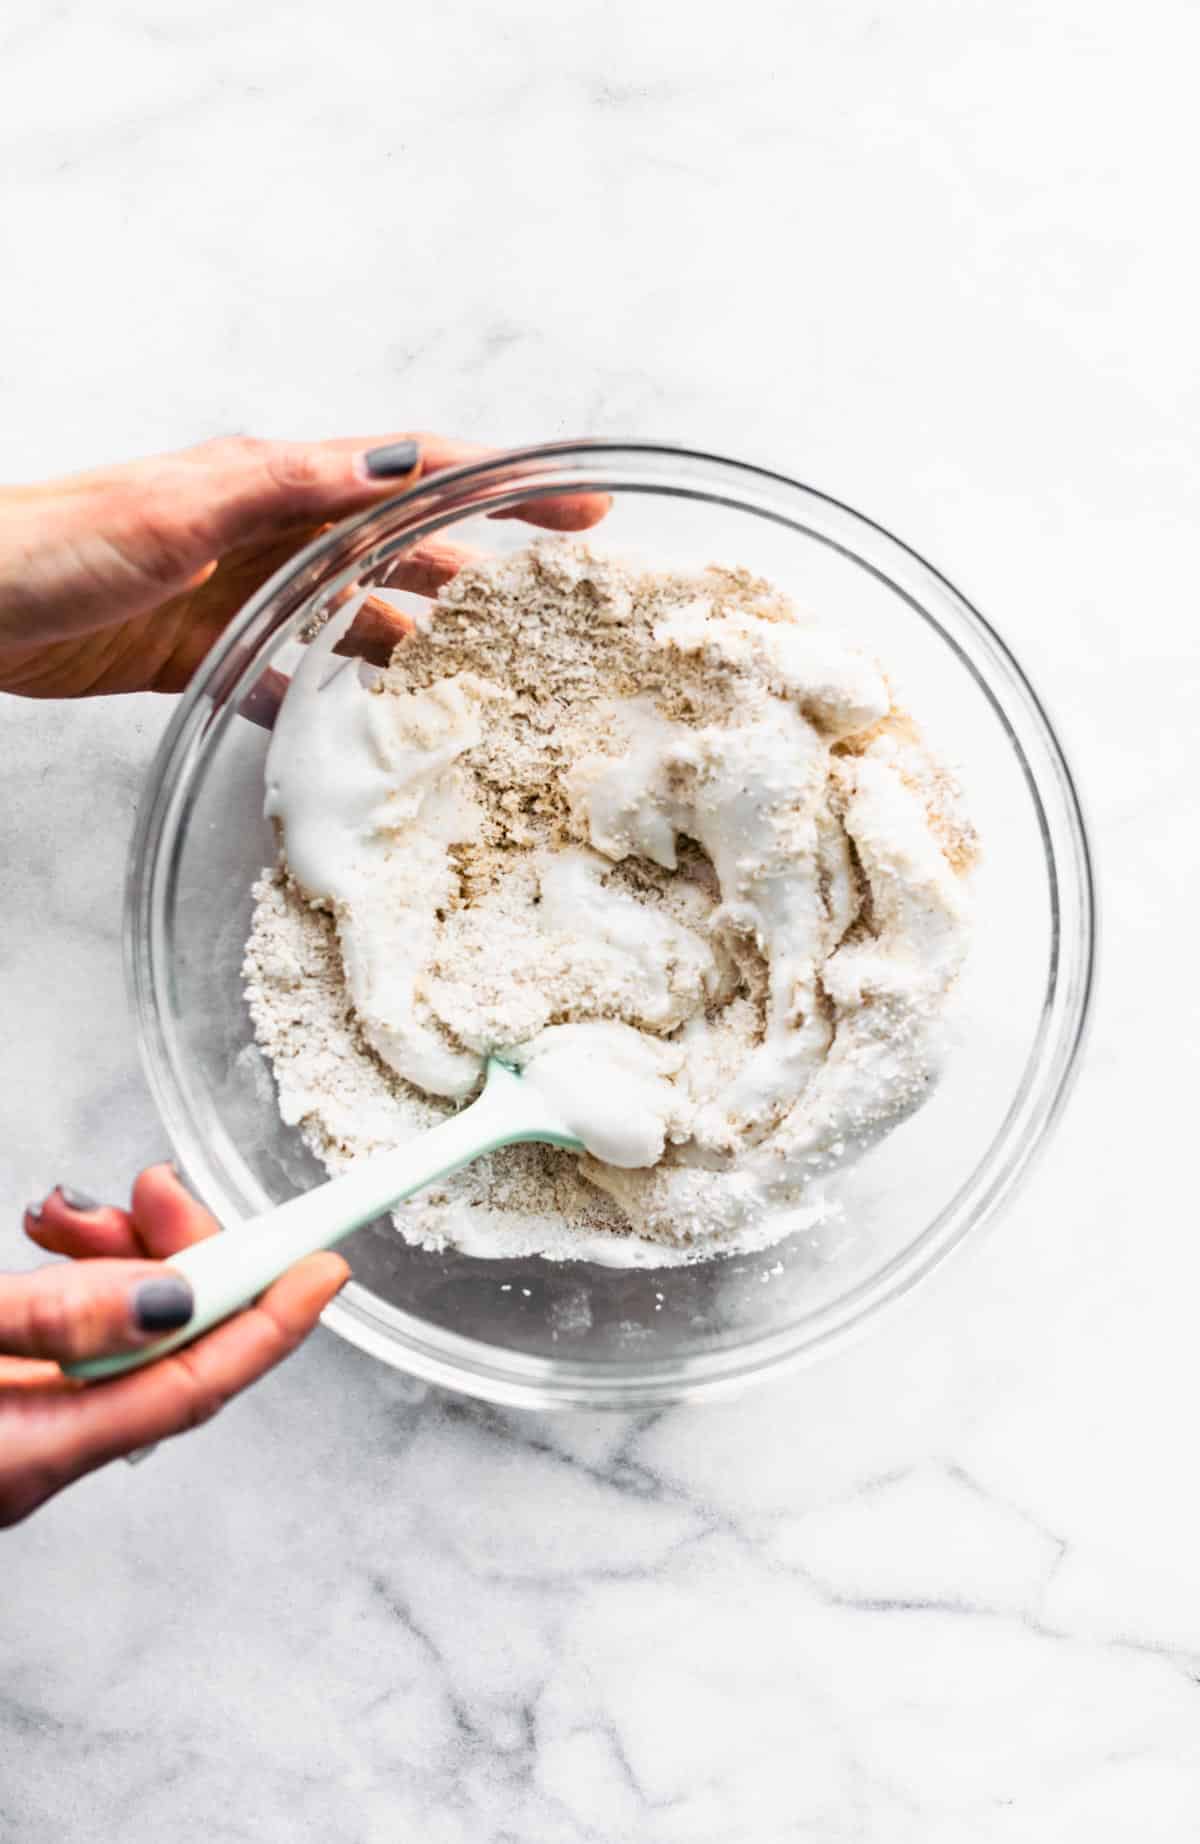 two hands holding a bowl of vegan mocha coconut macaroon batter, mixing it together